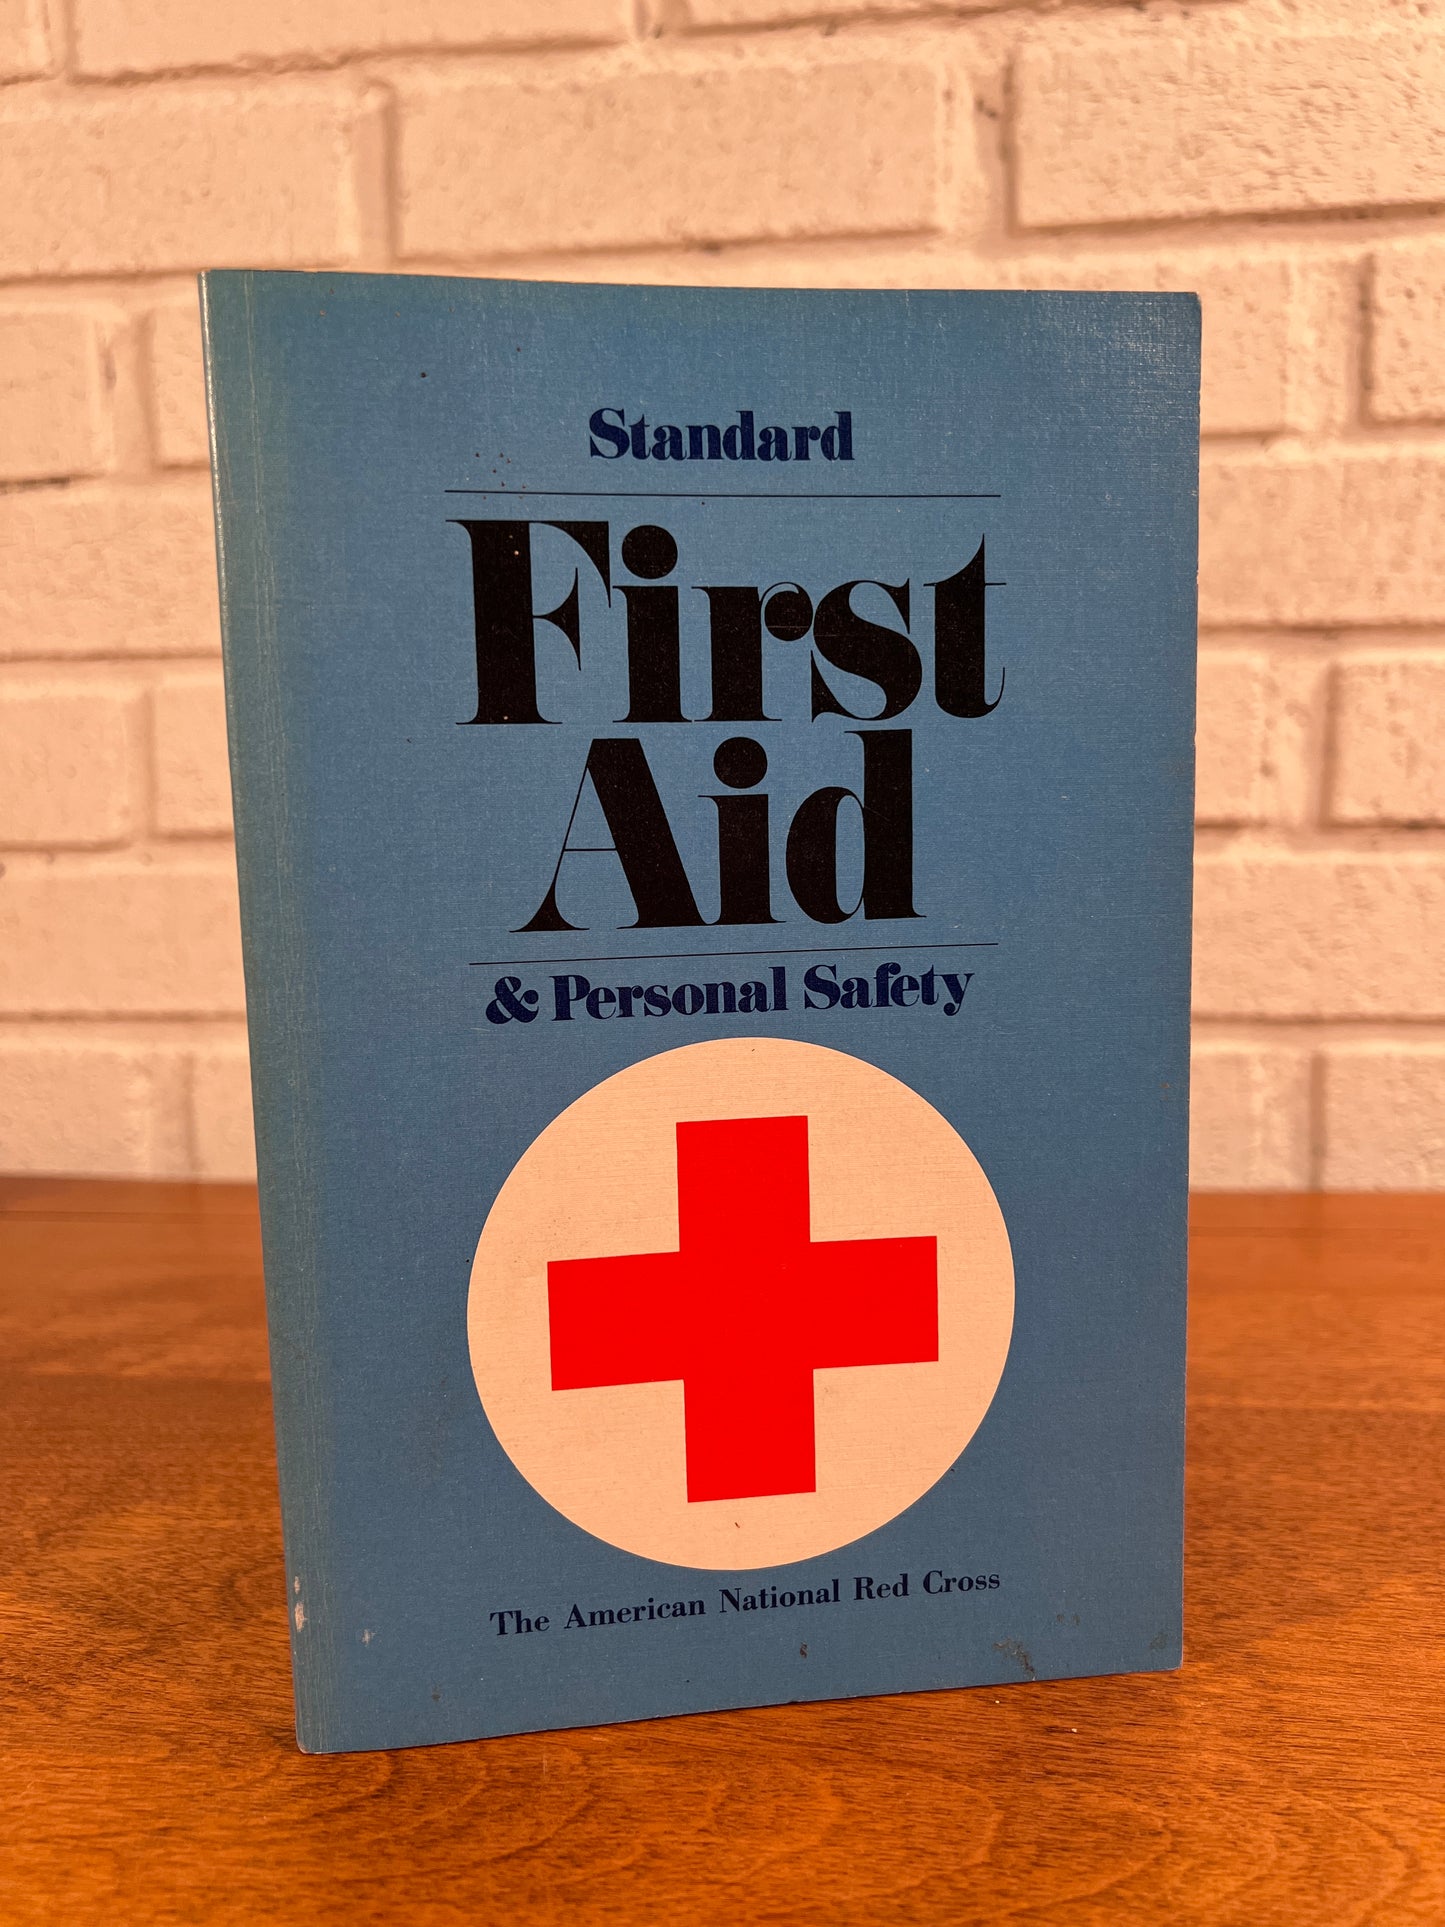 Standard First Aid & Personal Safety American National Red Cross